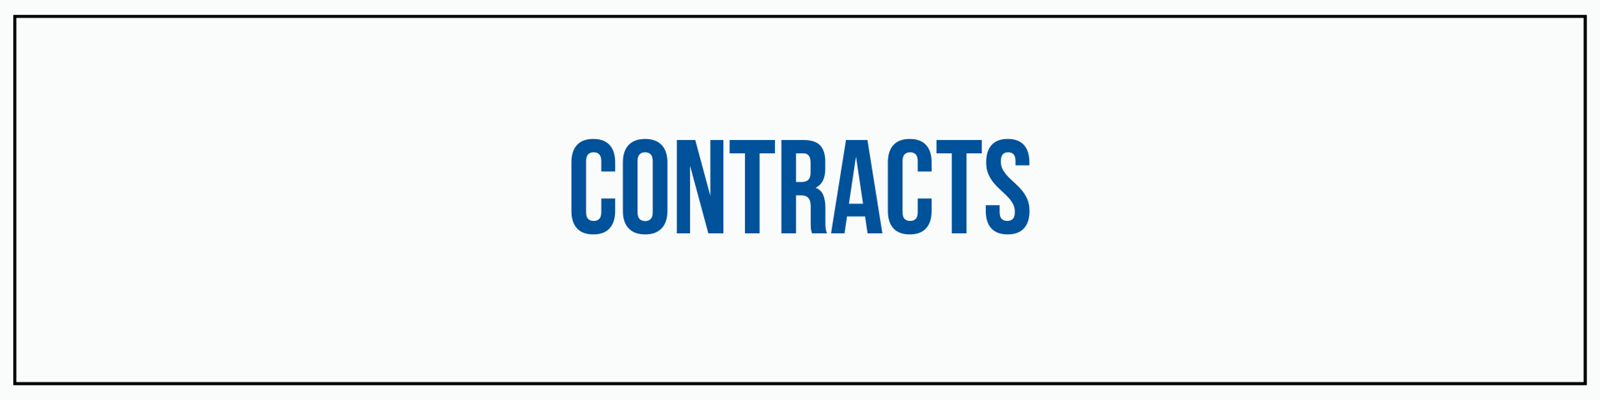 PS_Header_2contracts.png